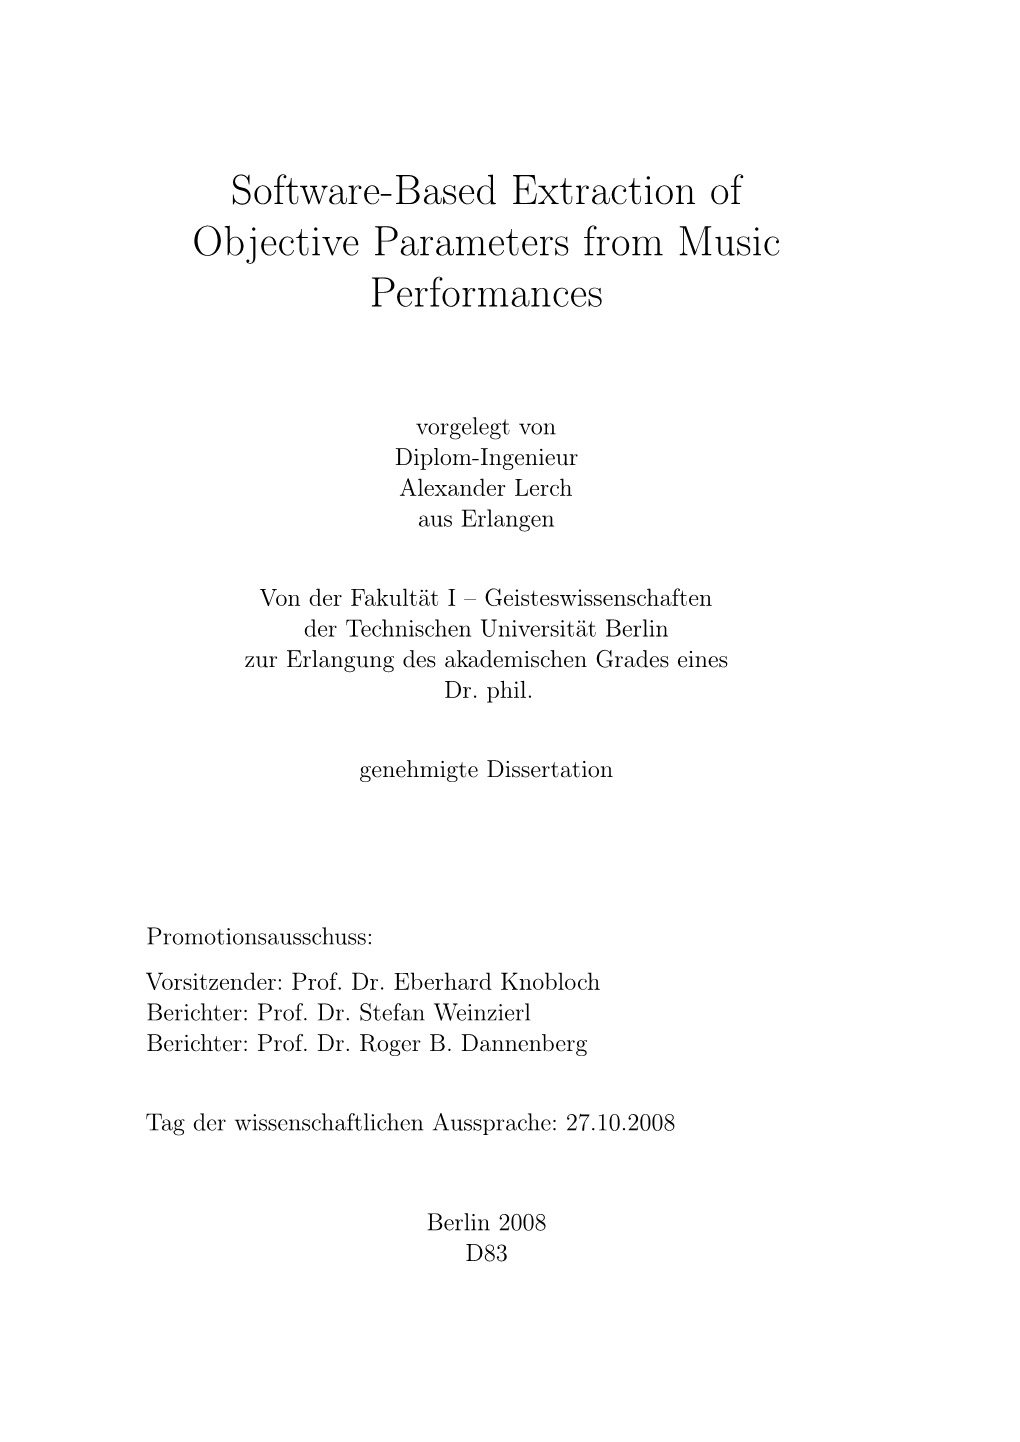 Software-Based Extraction of Objective Parameters from Music Performances